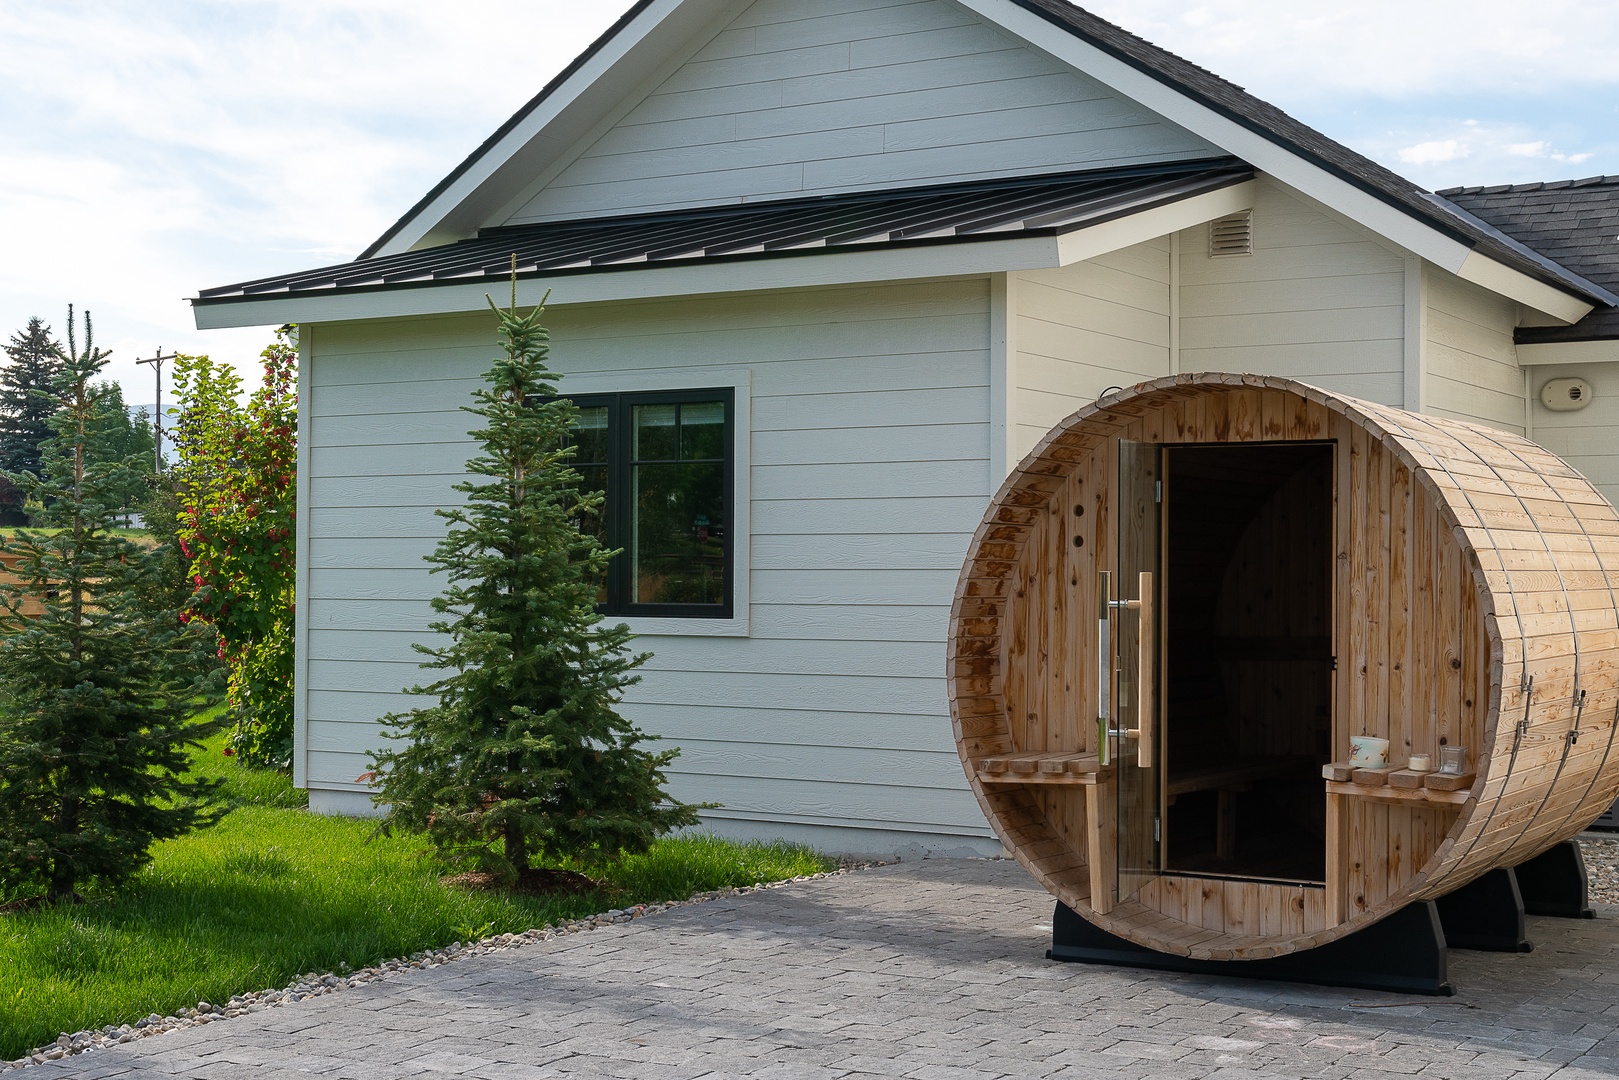 Triumph Vacation Rentals, Contemporary Red Feather Comfort - There's a private barrel-shaped sauna just out back